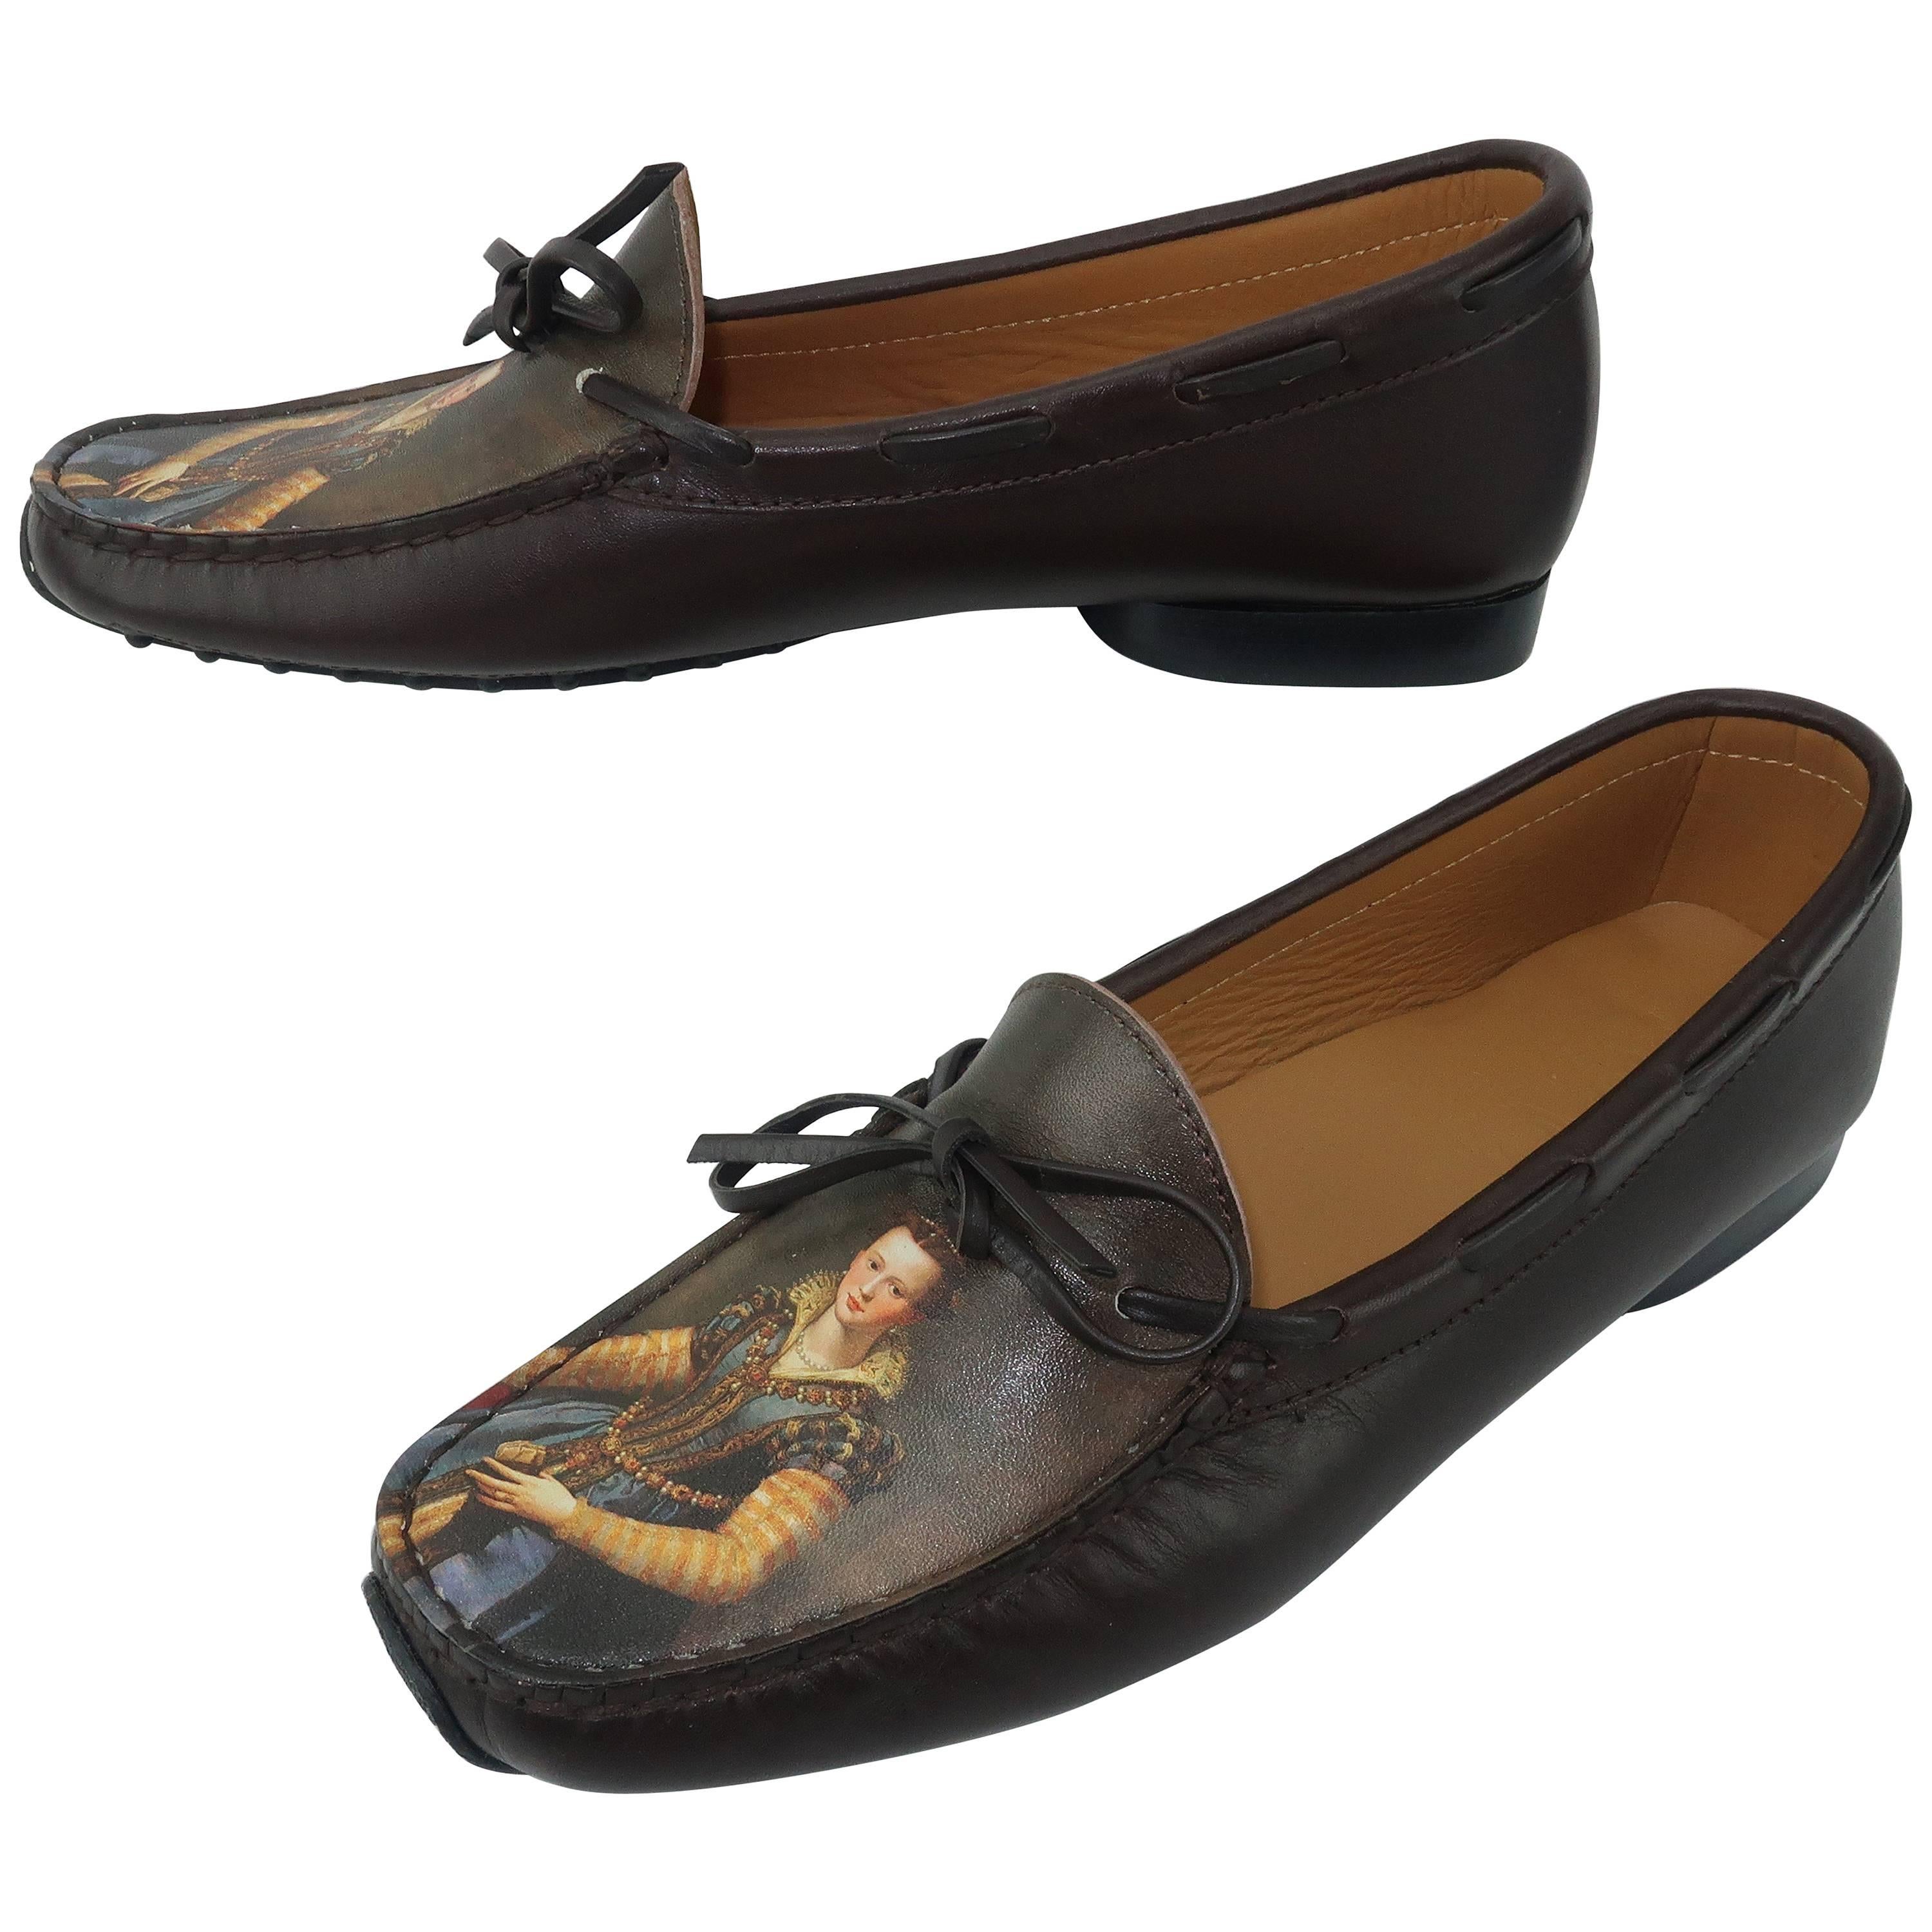  Icon shoes Art Printed Brown Leather Moccasin Loafers 